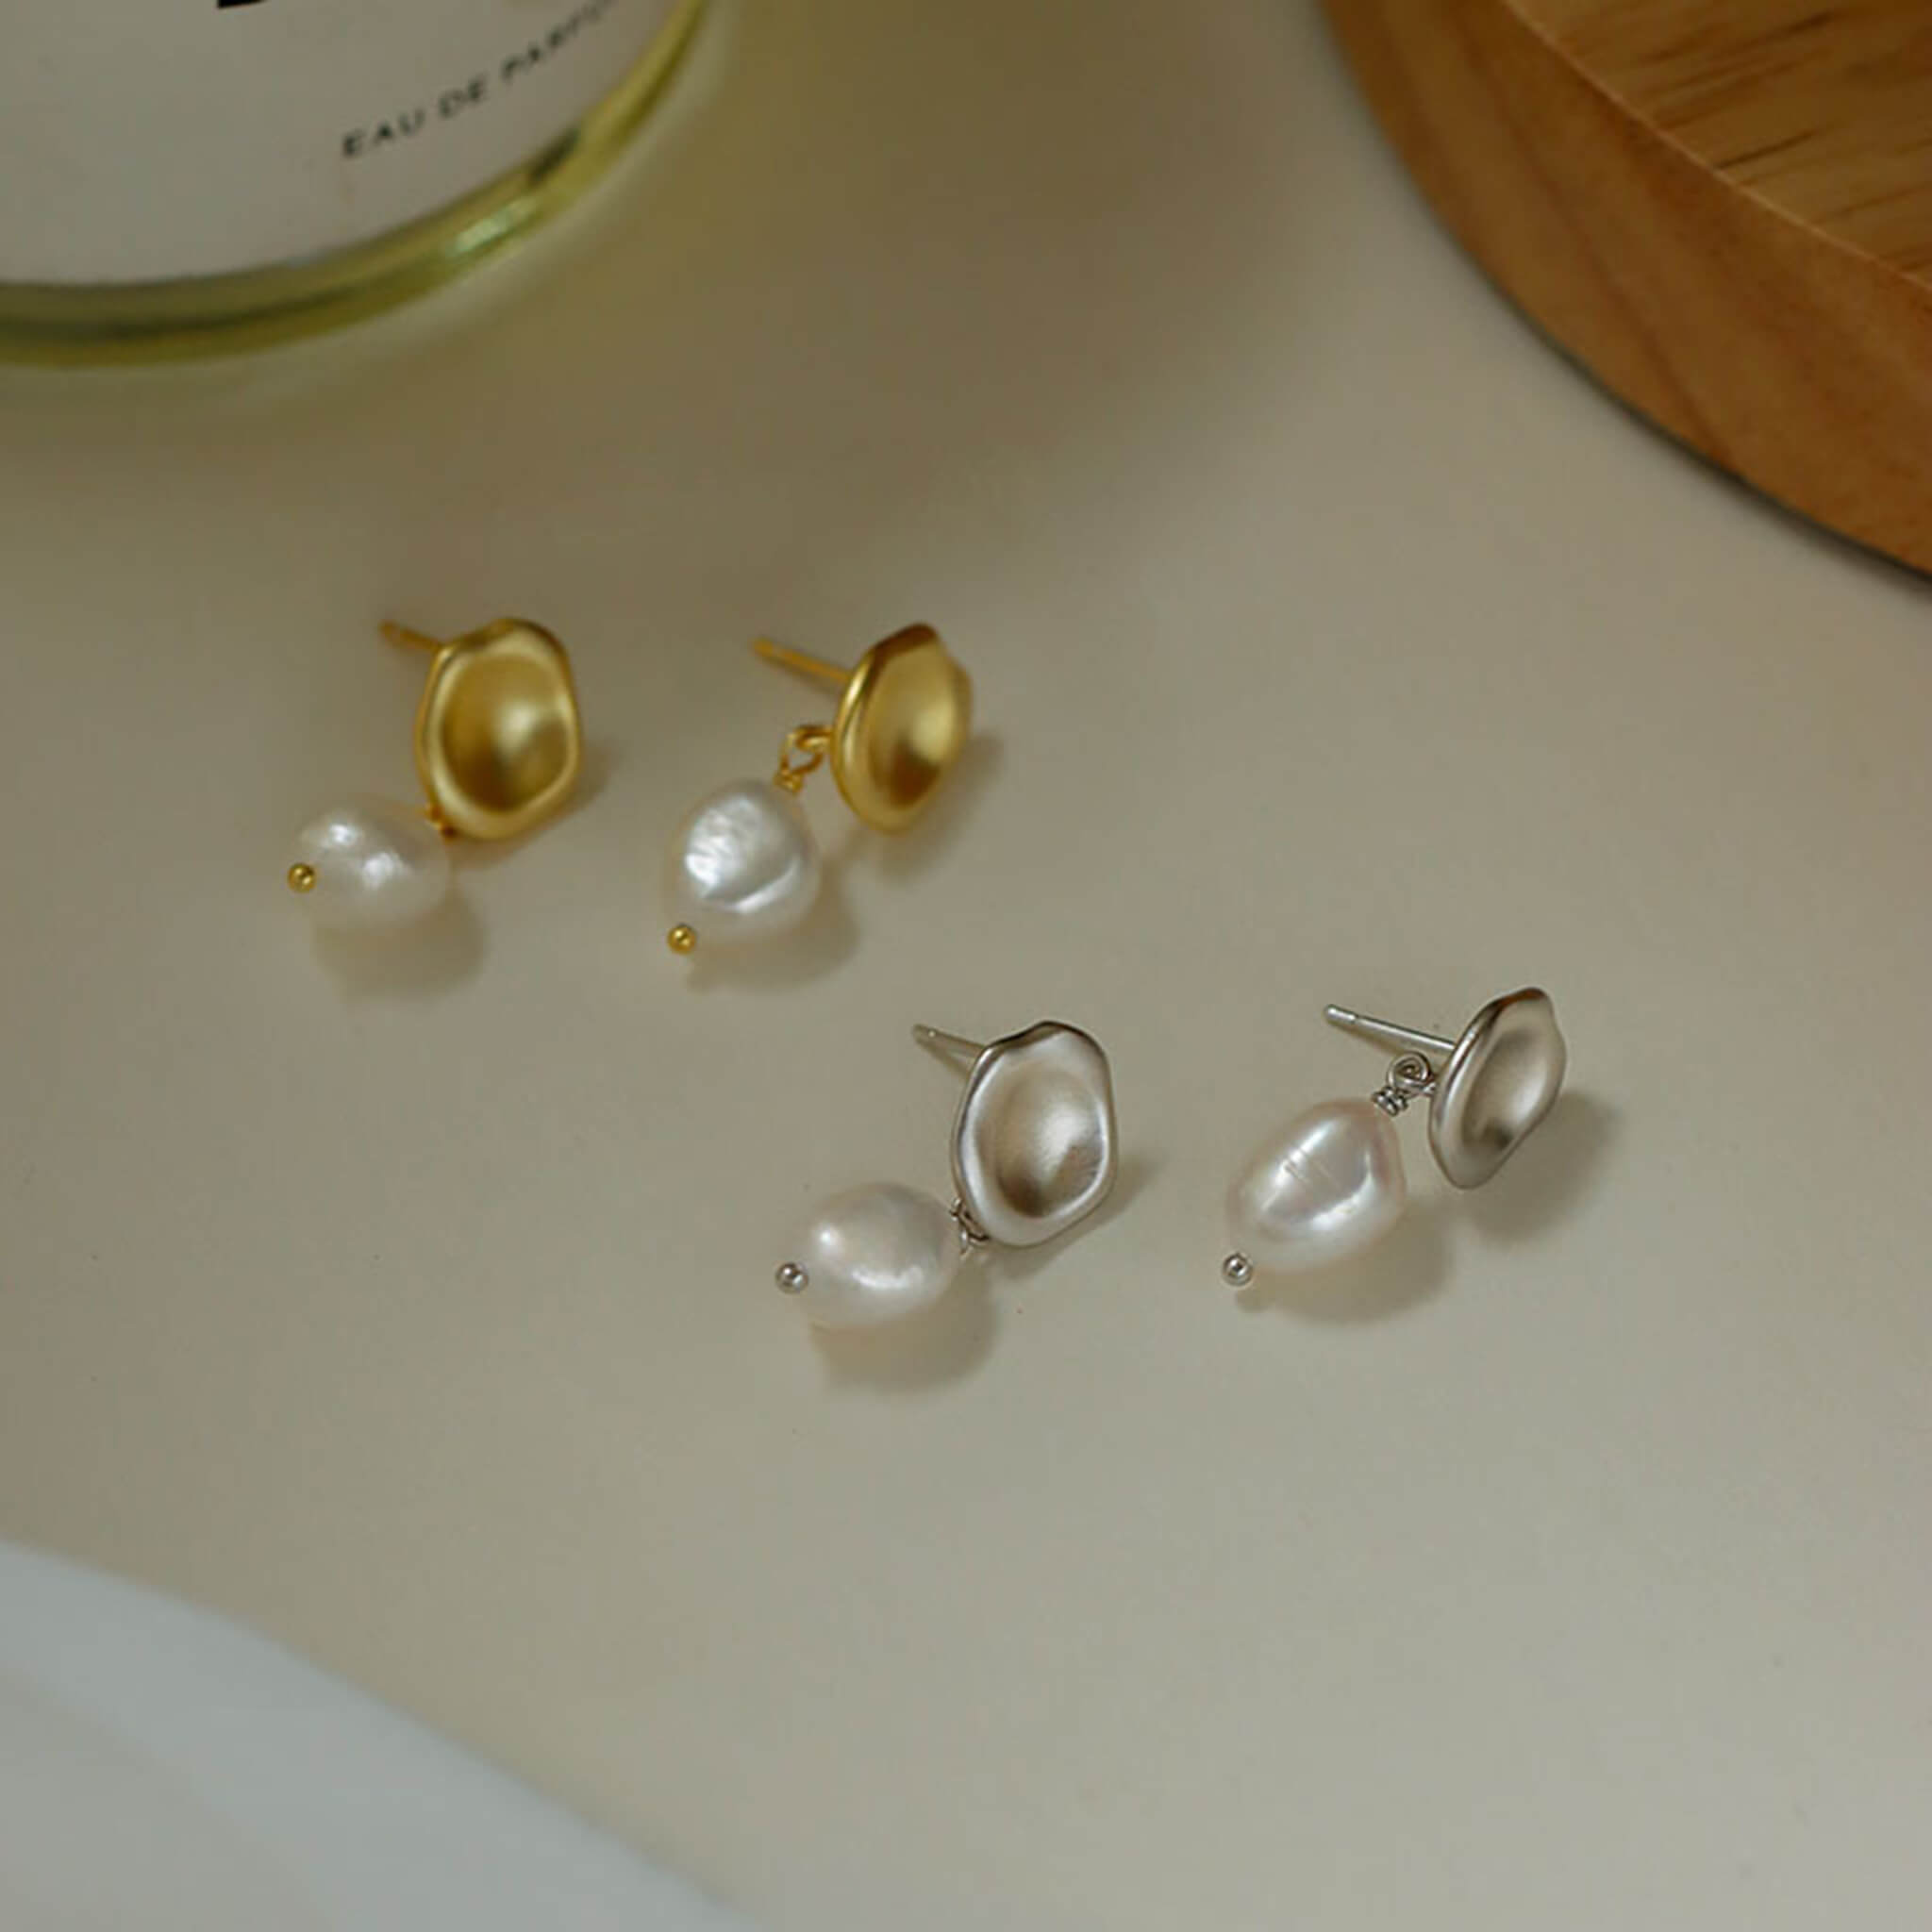 Artistic Vintage 925 Silver Baroque Freshwater Pearl Earrings  UponBasics   